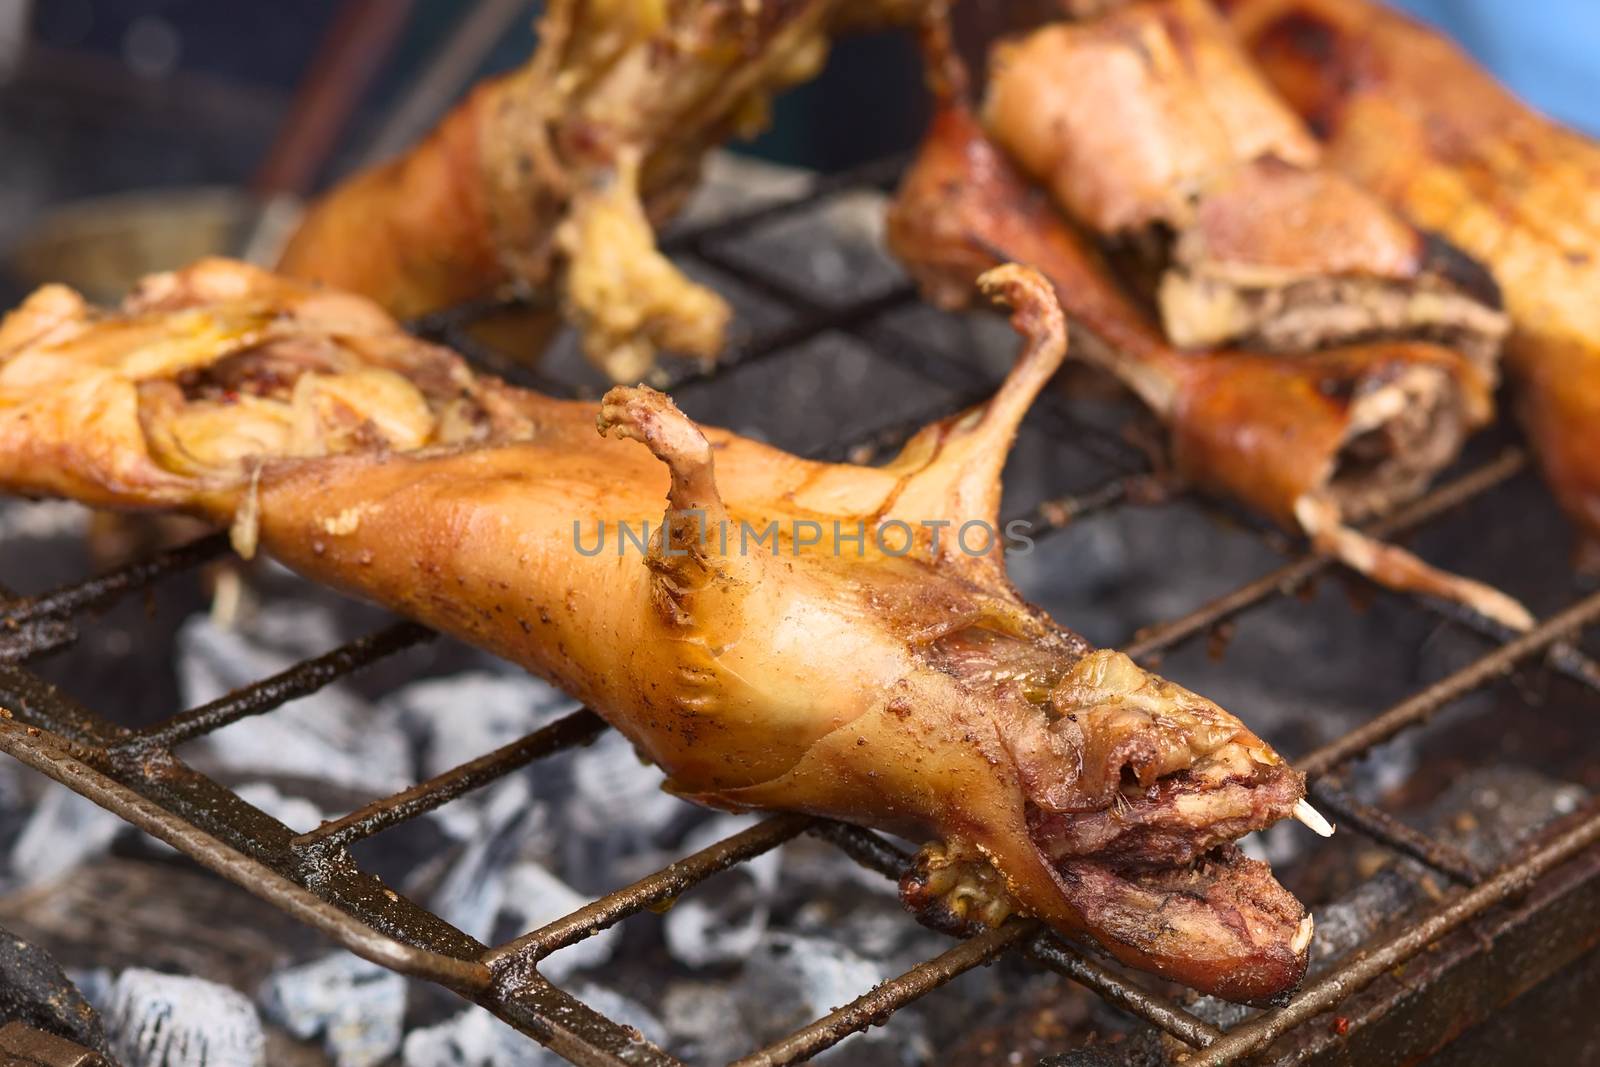 BANOS, ECUADOR - FEBRUARY 28, 2014: Guinea pigs being barbecued for sale on Ambato Street at the market hall on February 28, 2014 in Banos, Ecuador. In Ecuador, guinea pig (or cuy in Spanish) is considered a delicacy, and is usually very expensive.